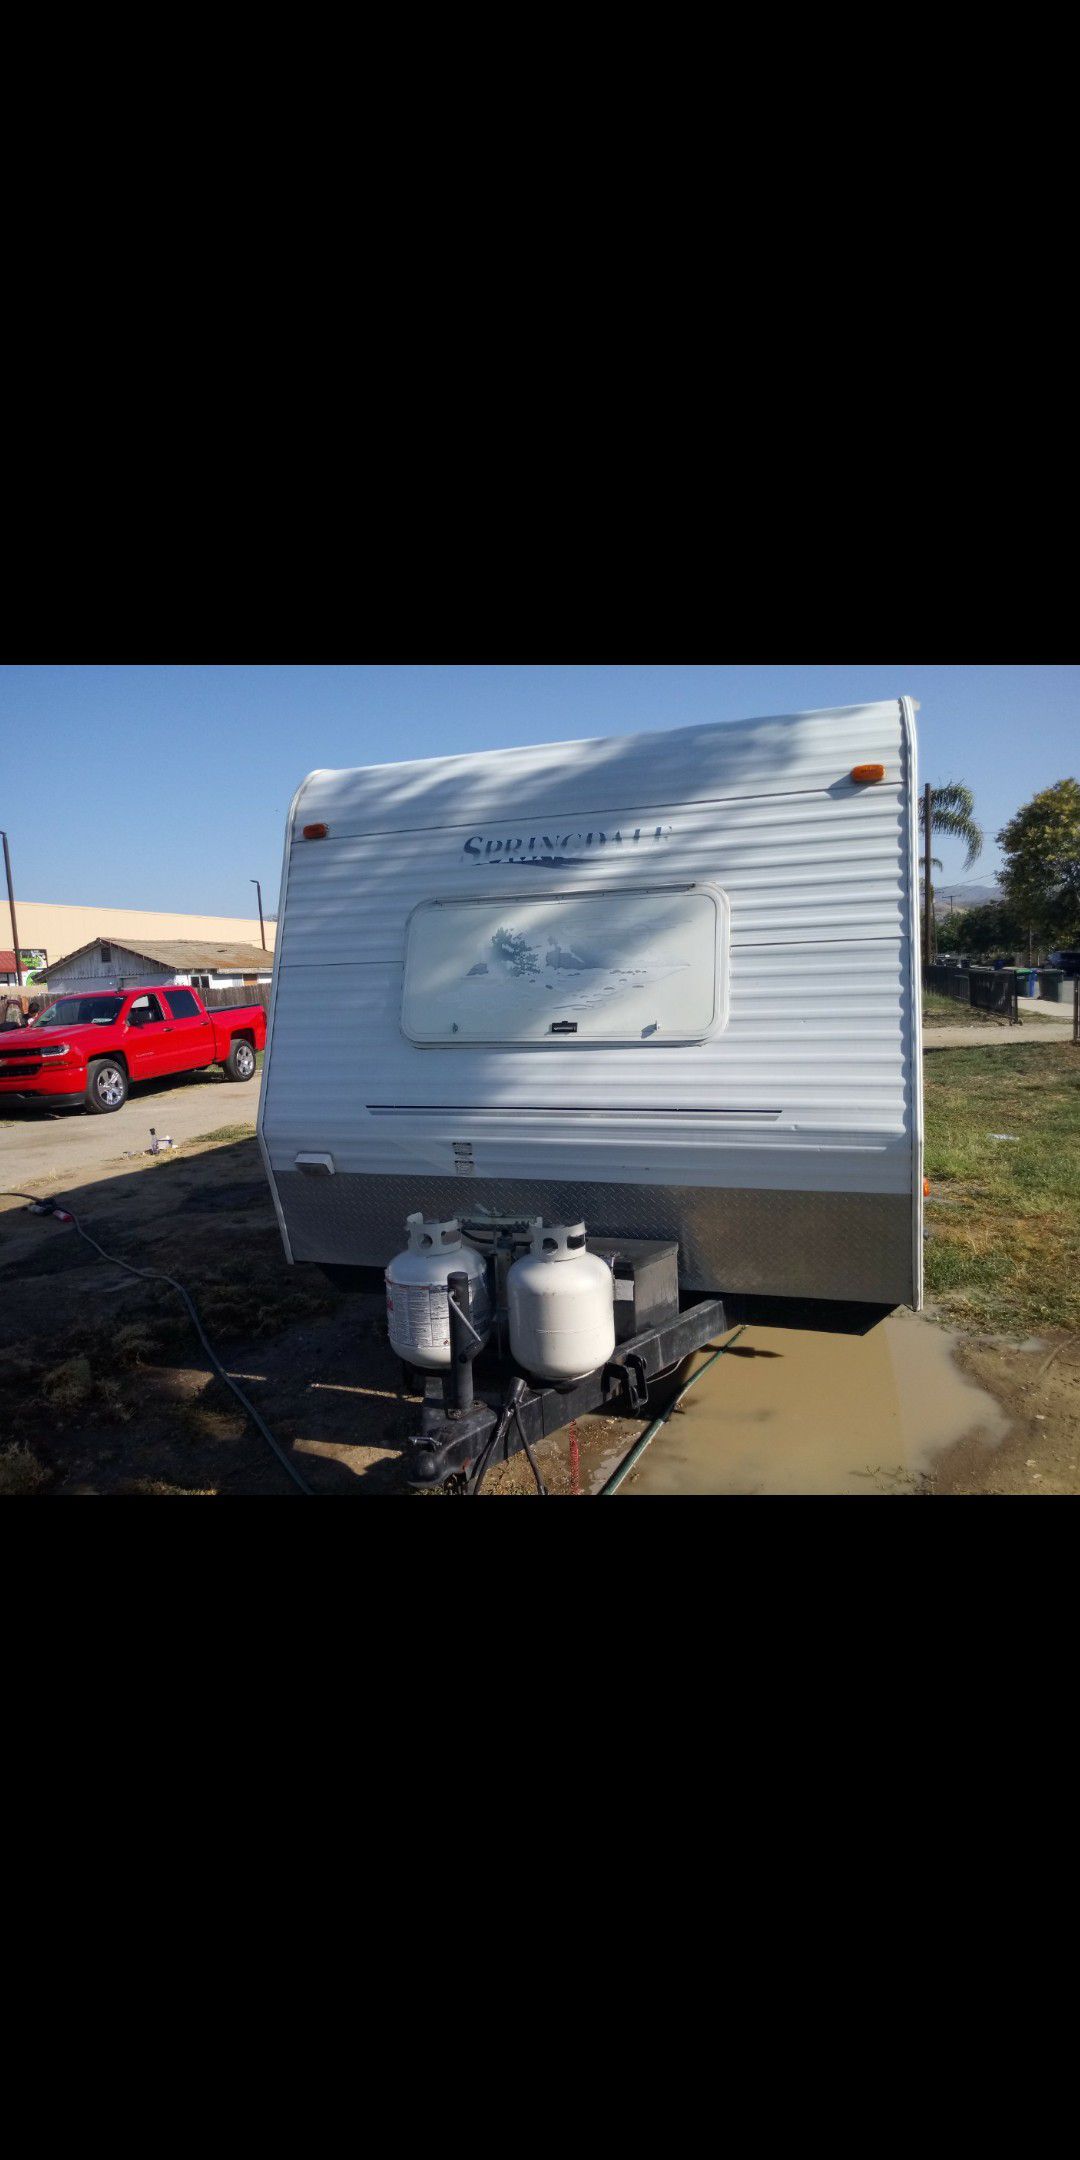 2003 Springdale by Keystone Bunkhouse travel trailer sleeps up to 8 people everything works title in hand